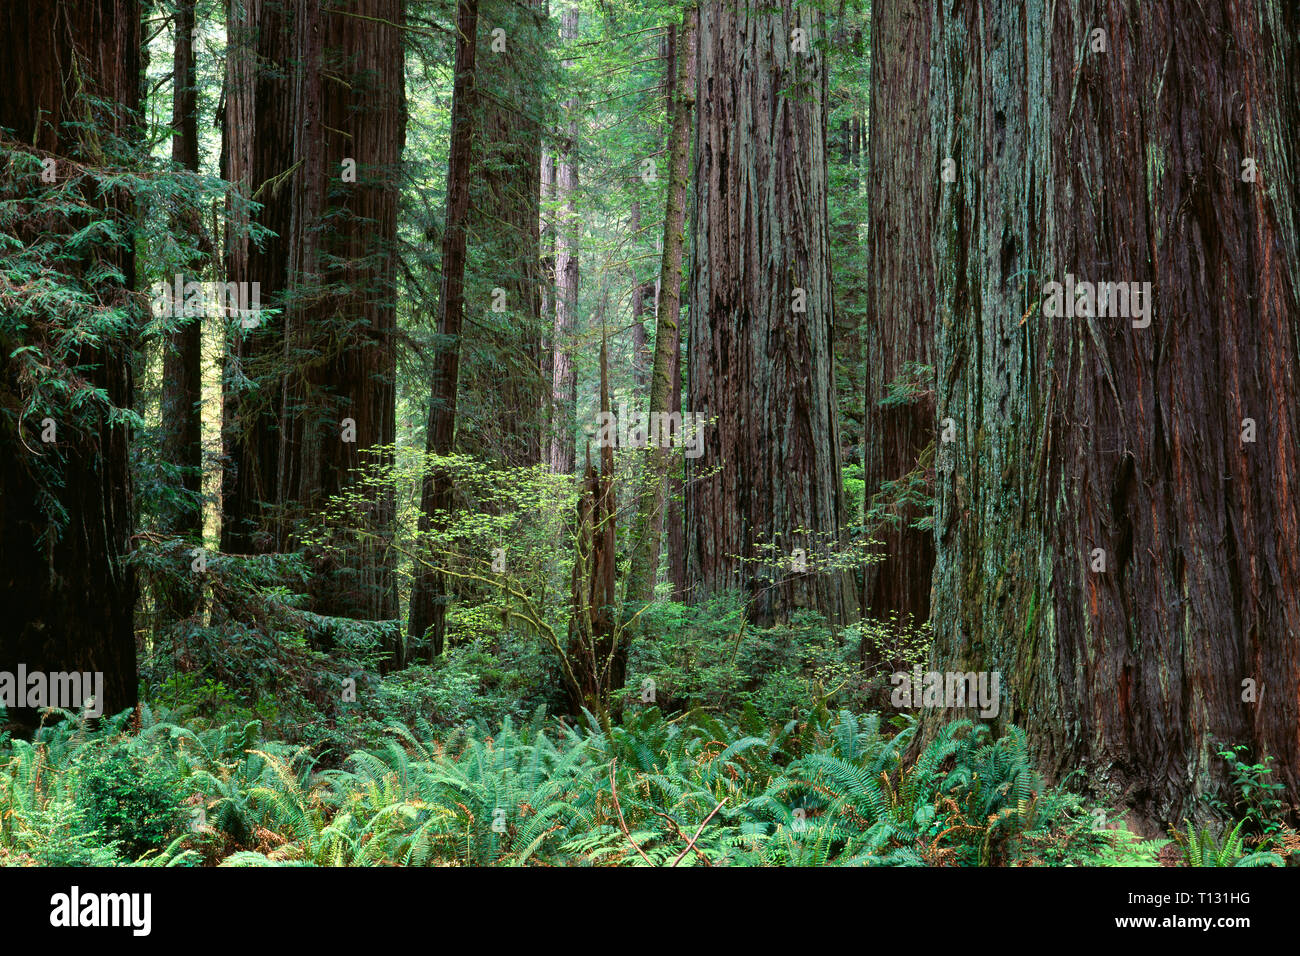 USA, California, Prairie Creek Redwoods State Park, Redwood trees tower above ferns and seedlings in understory. Stock Photo